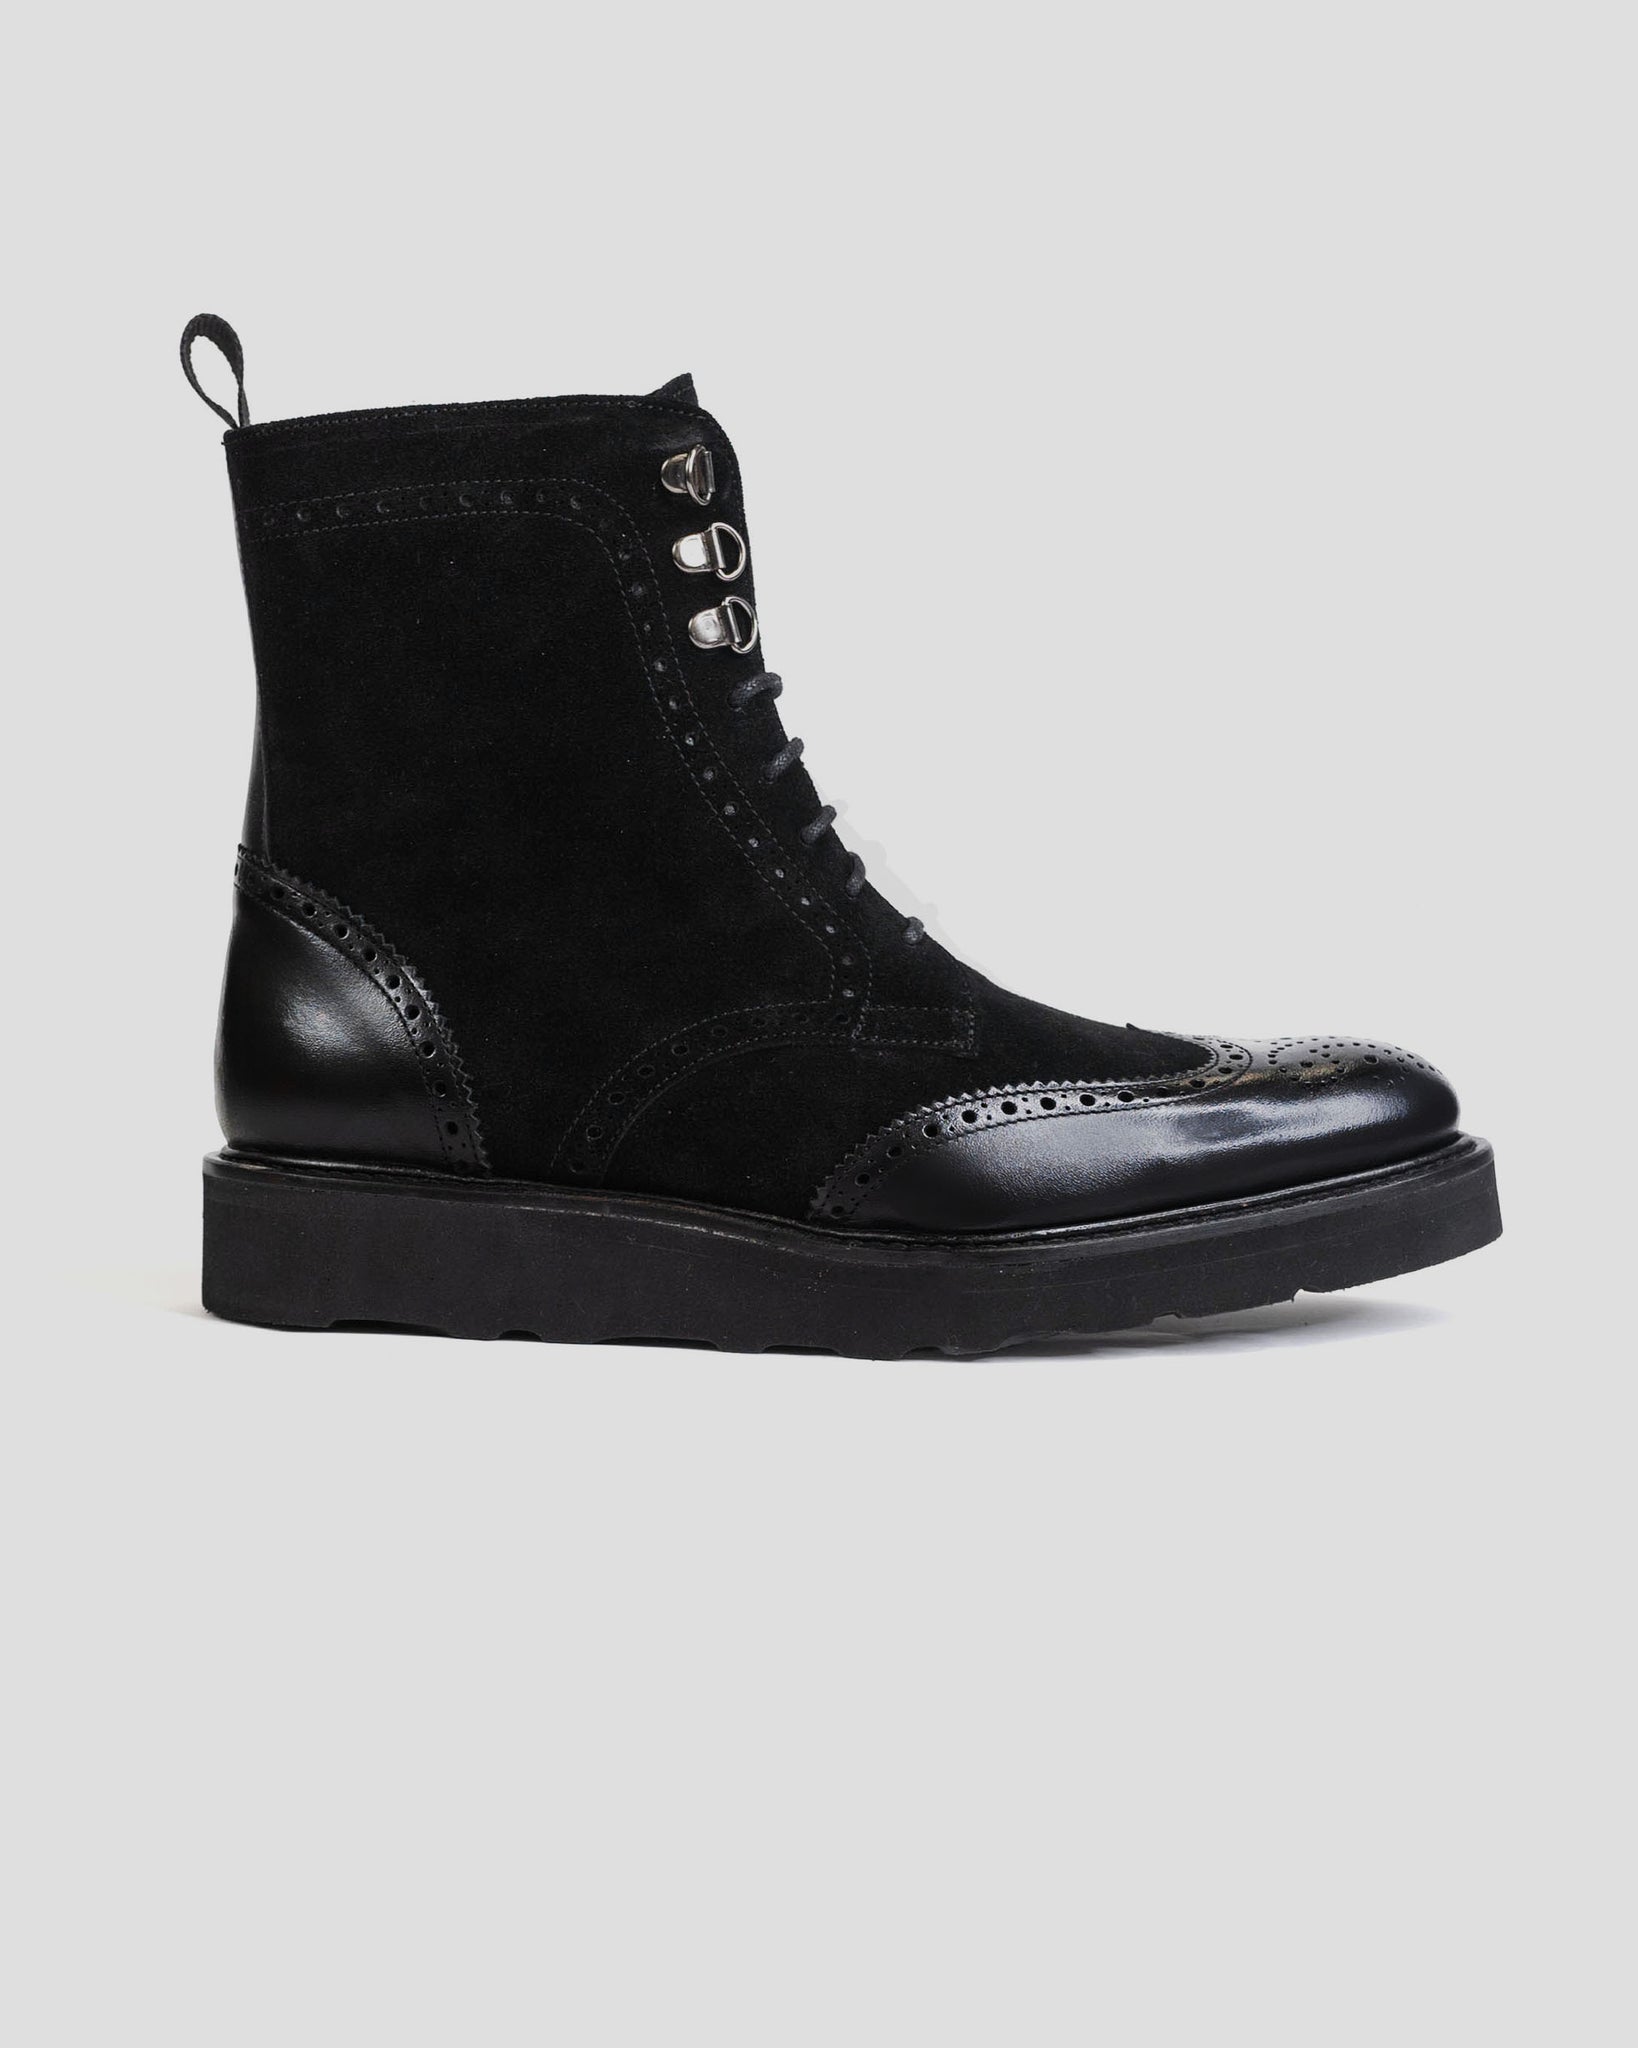 Southern Gents Rogue Sport Boot - Triple Black